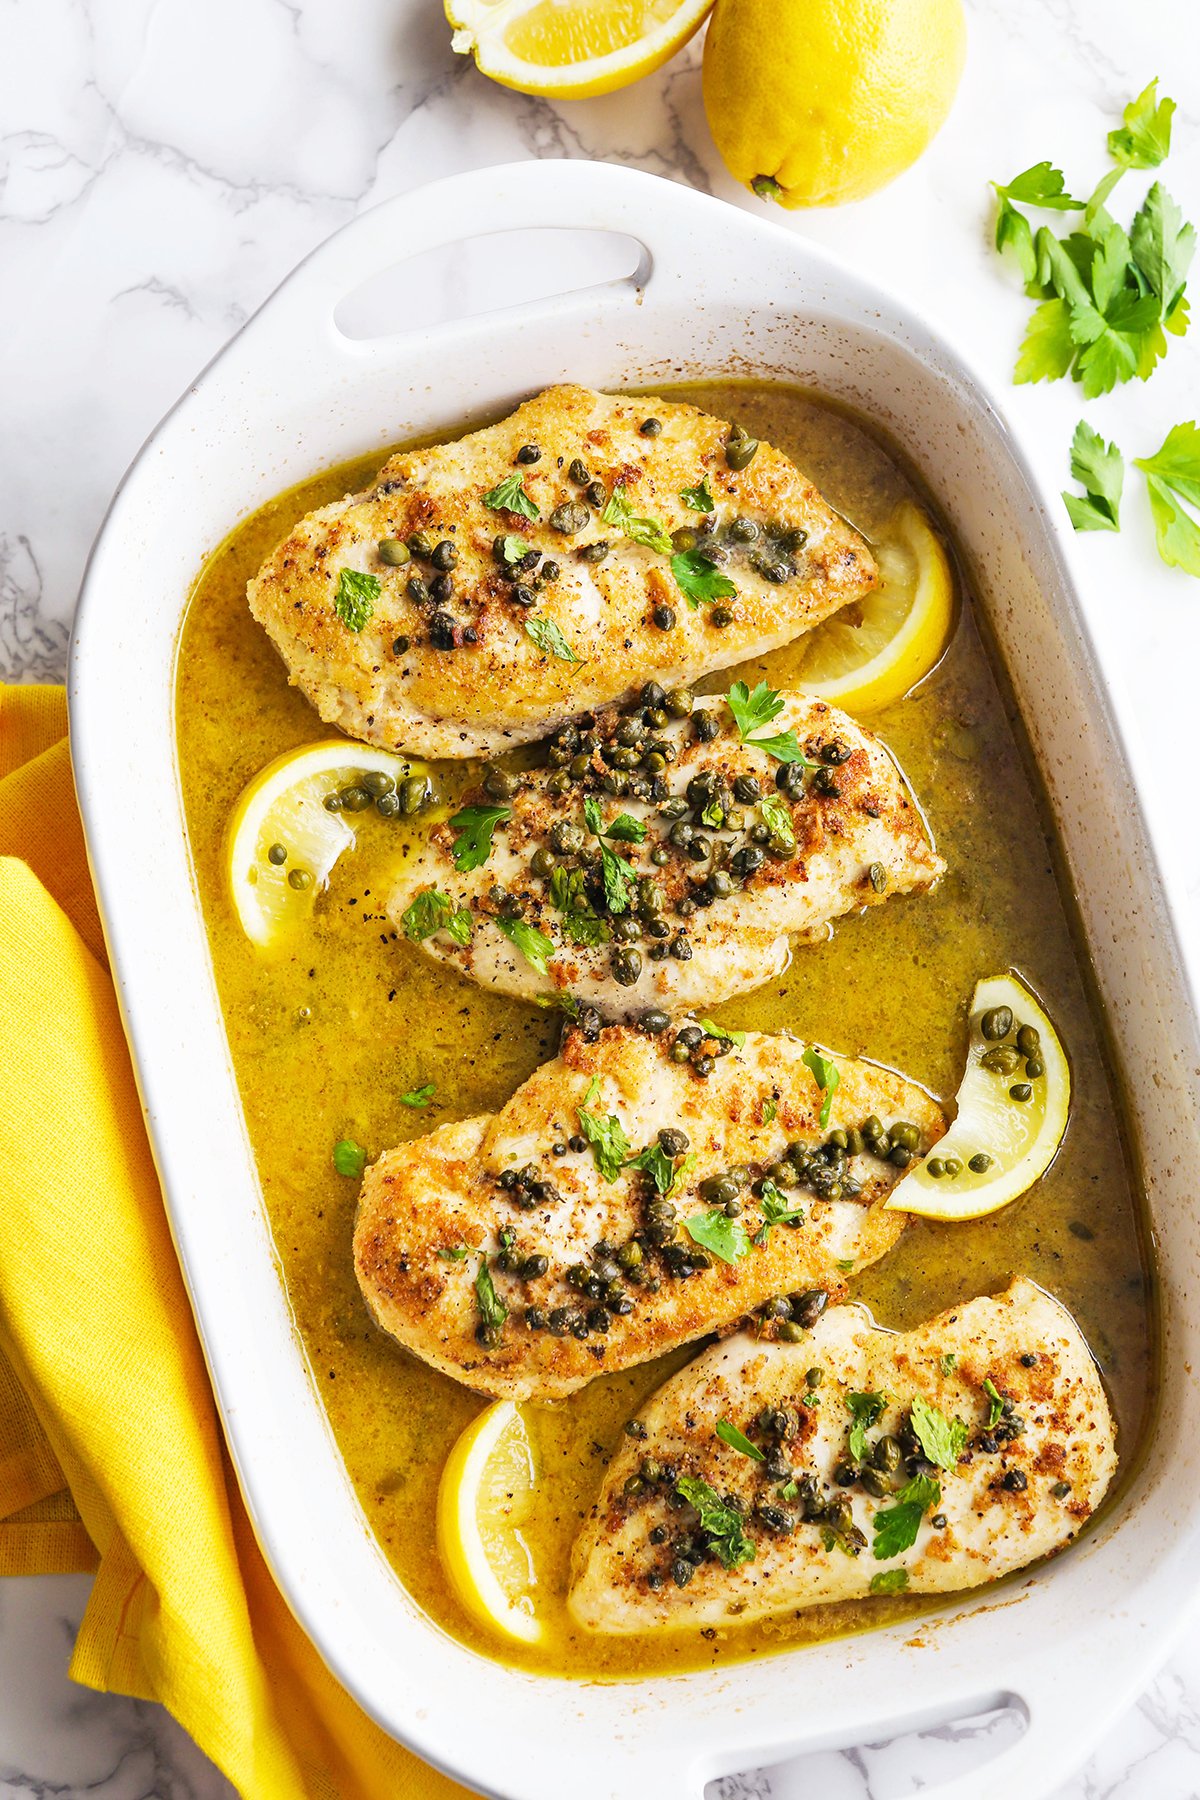 top view of baking dish filled with lemon chicken piccata surrounded by lemons.